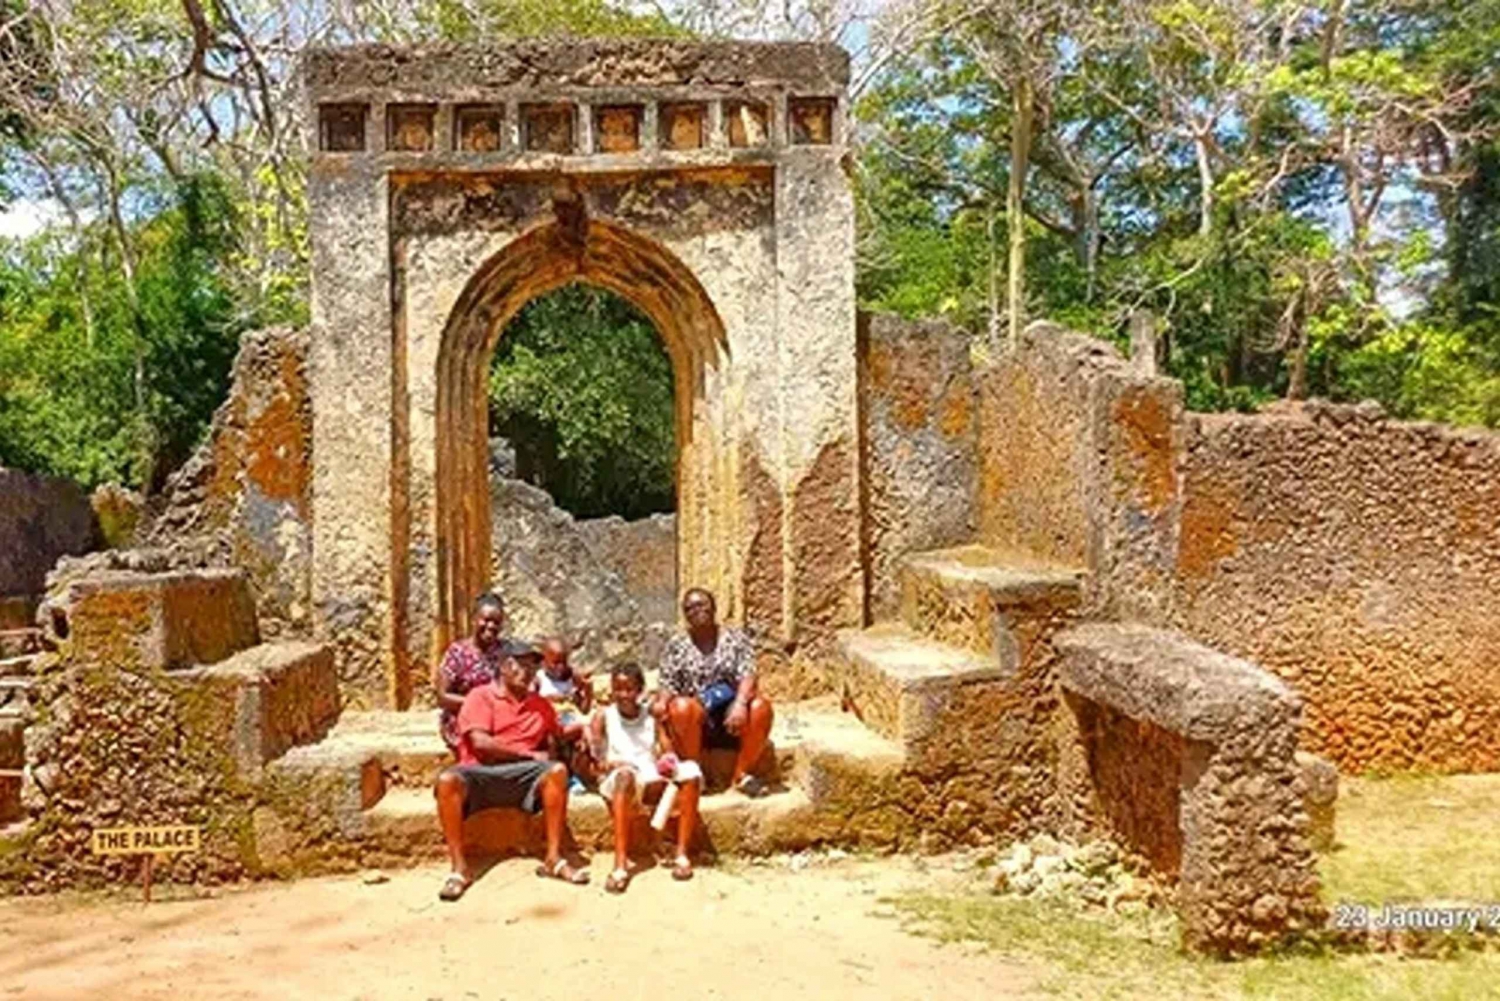 Malindi City: Excursion And Historical Half Day Tour.